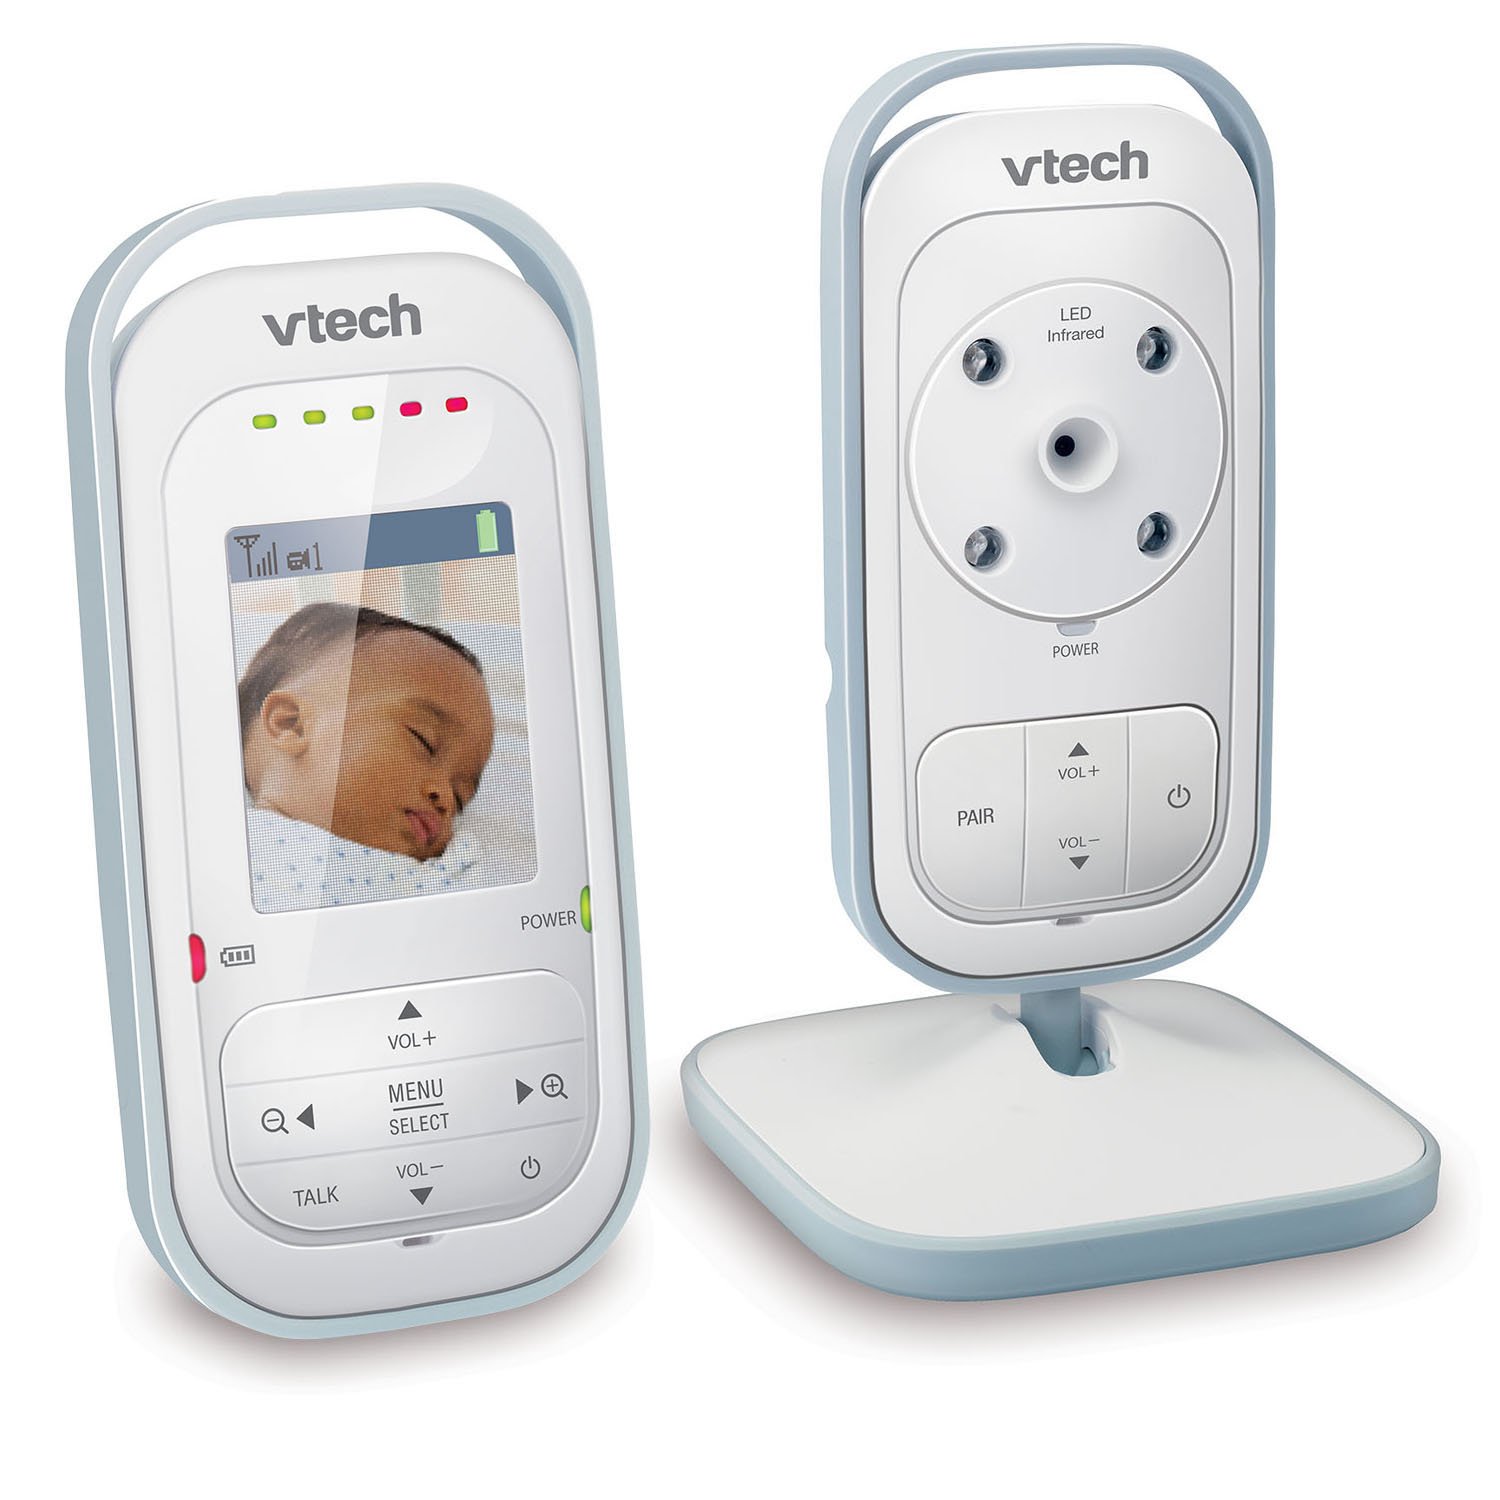 VTech VM311 Safe & Sound Video Baby Monitor with Night Vision High resolution 2" color LCD screen - image 1 of 16